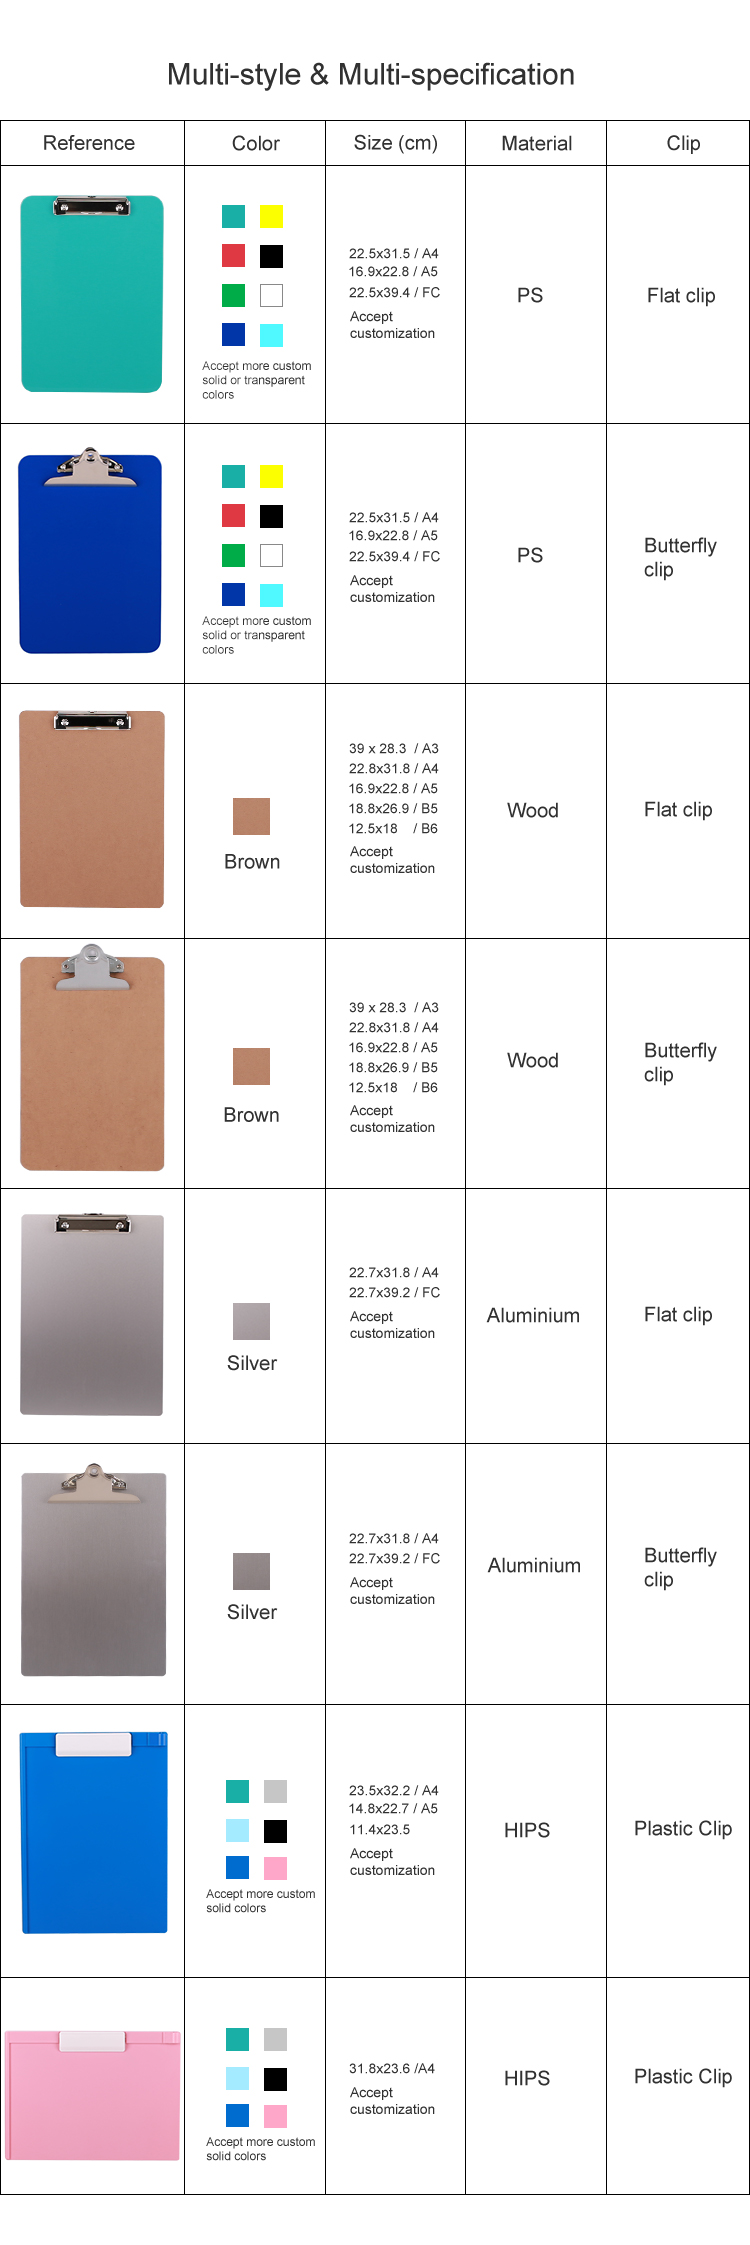 Plastic Low Profile/flat Letter Factory Directly 4 Inch Clips Board Wirting Clipboard Supplies Print Small Clipboards